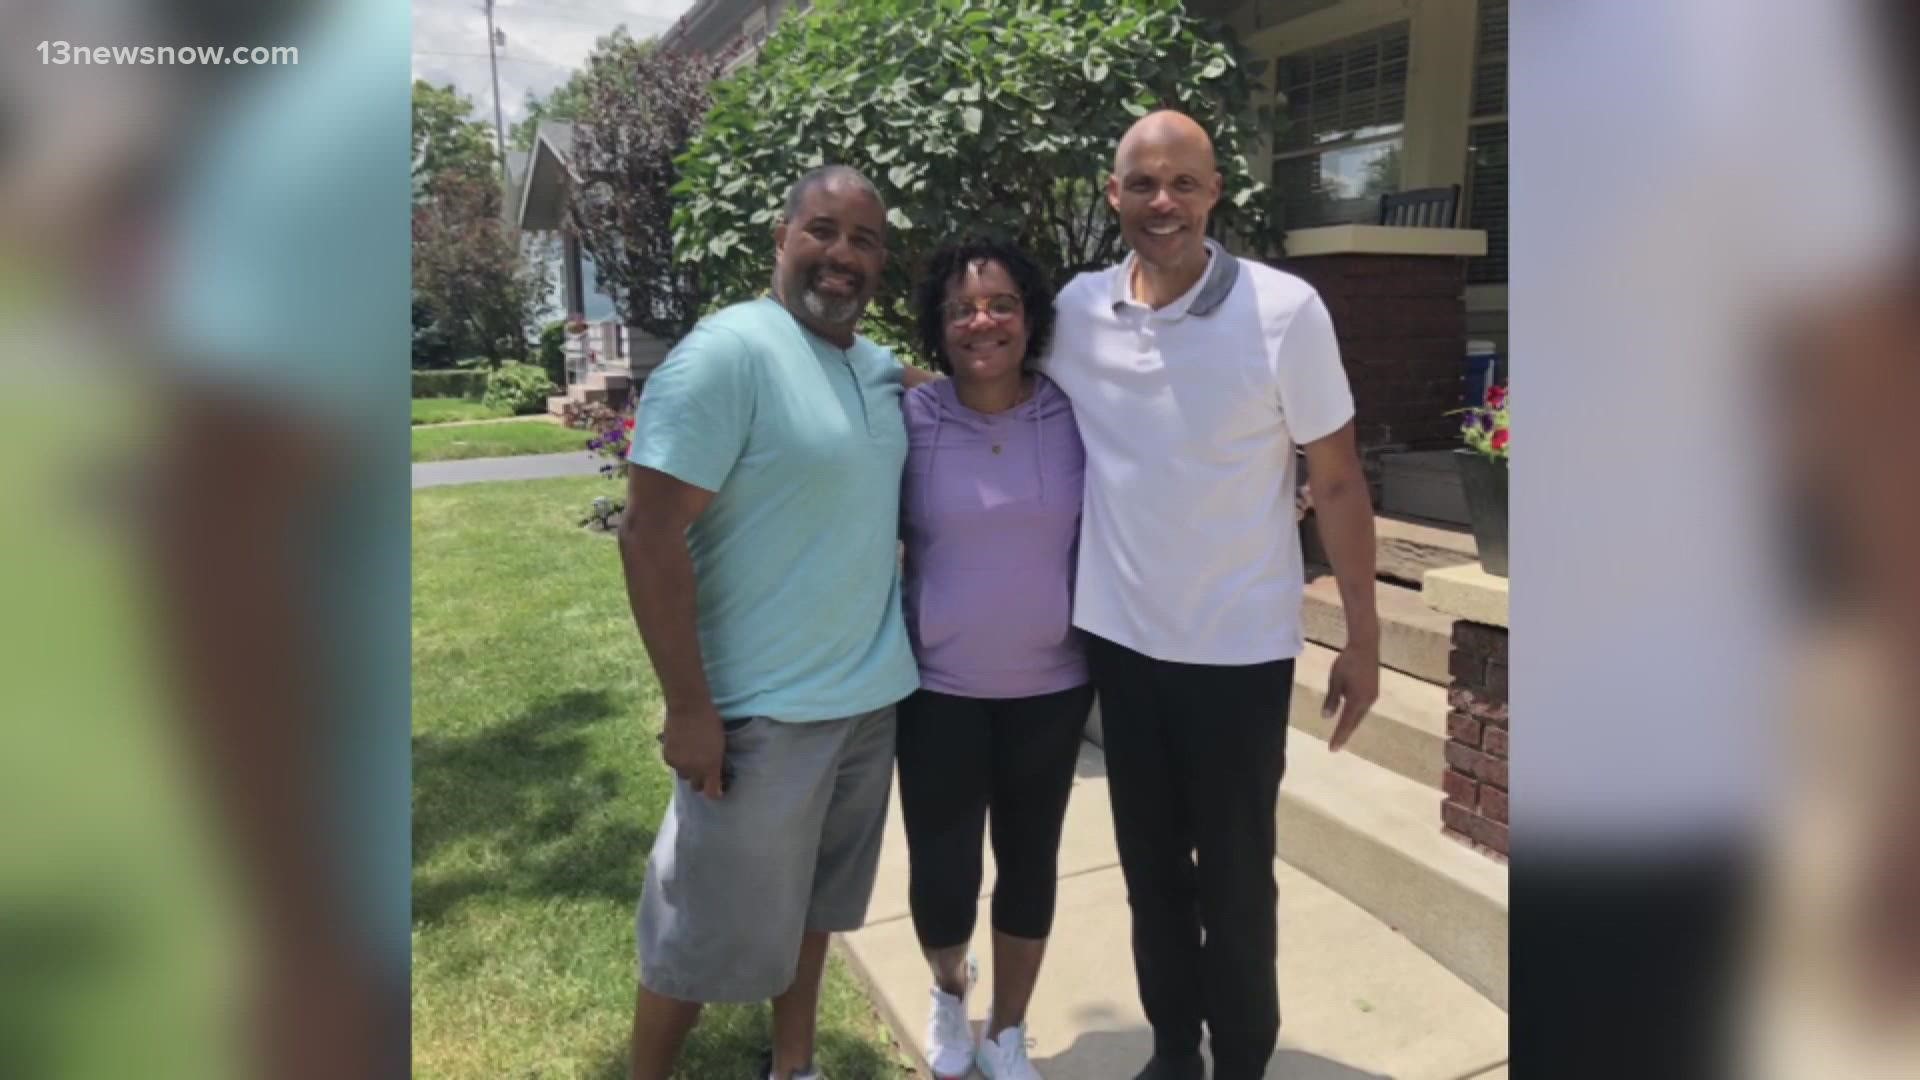 Two Norfolk State University grads are now forever connected. They share the story of a life-saving gift decades in the making.